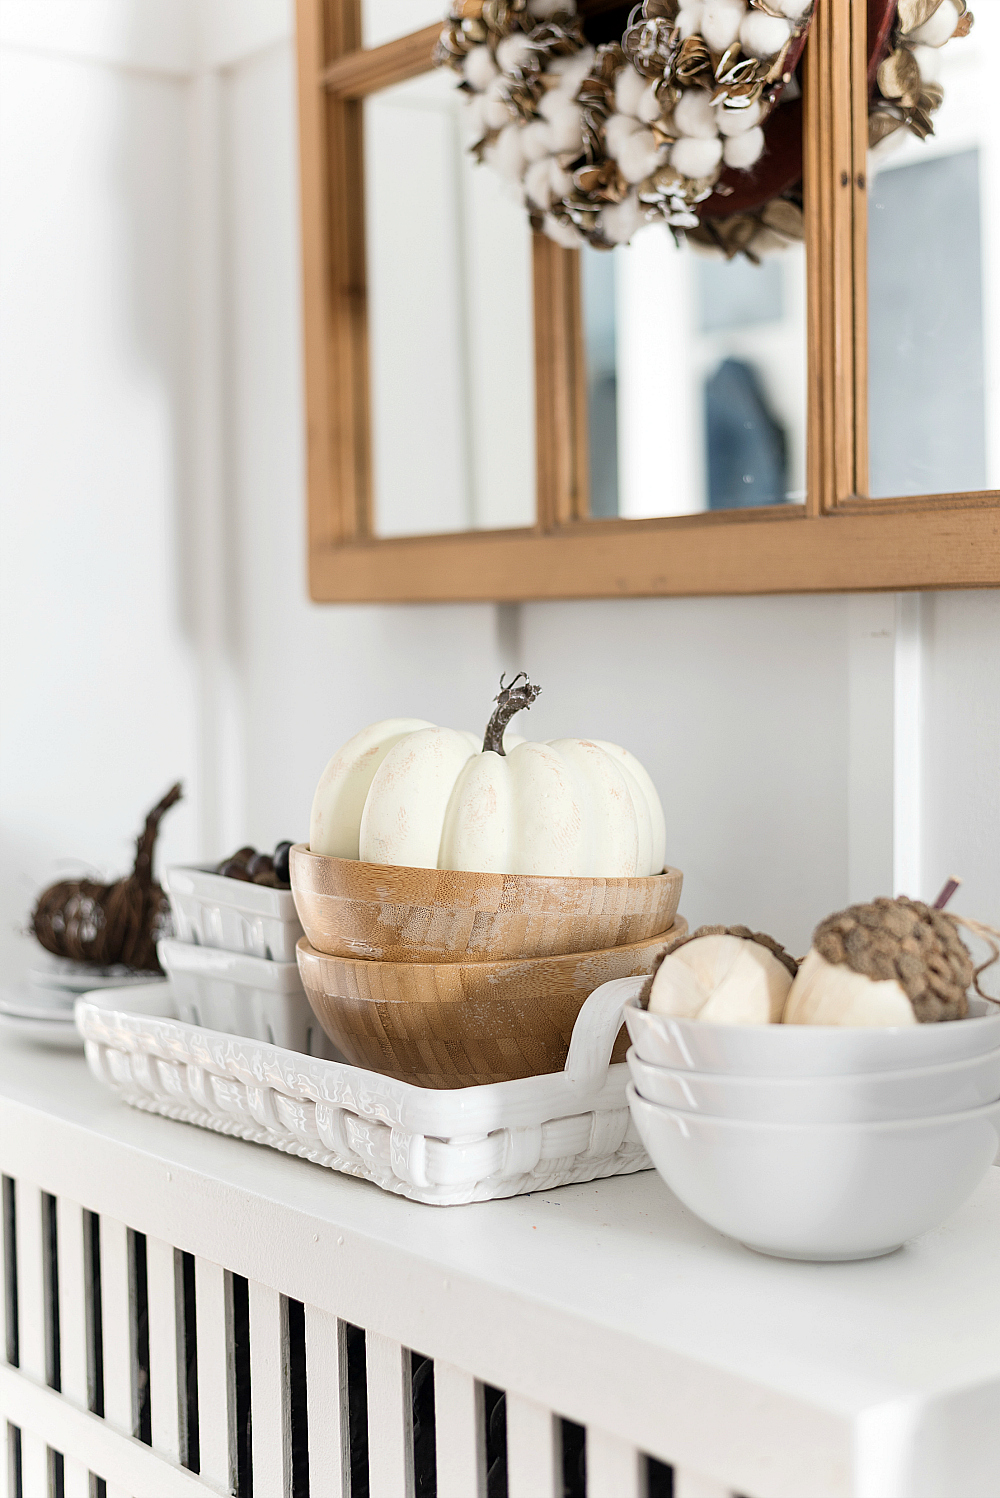 Decorating with White Pumpkins for Fall